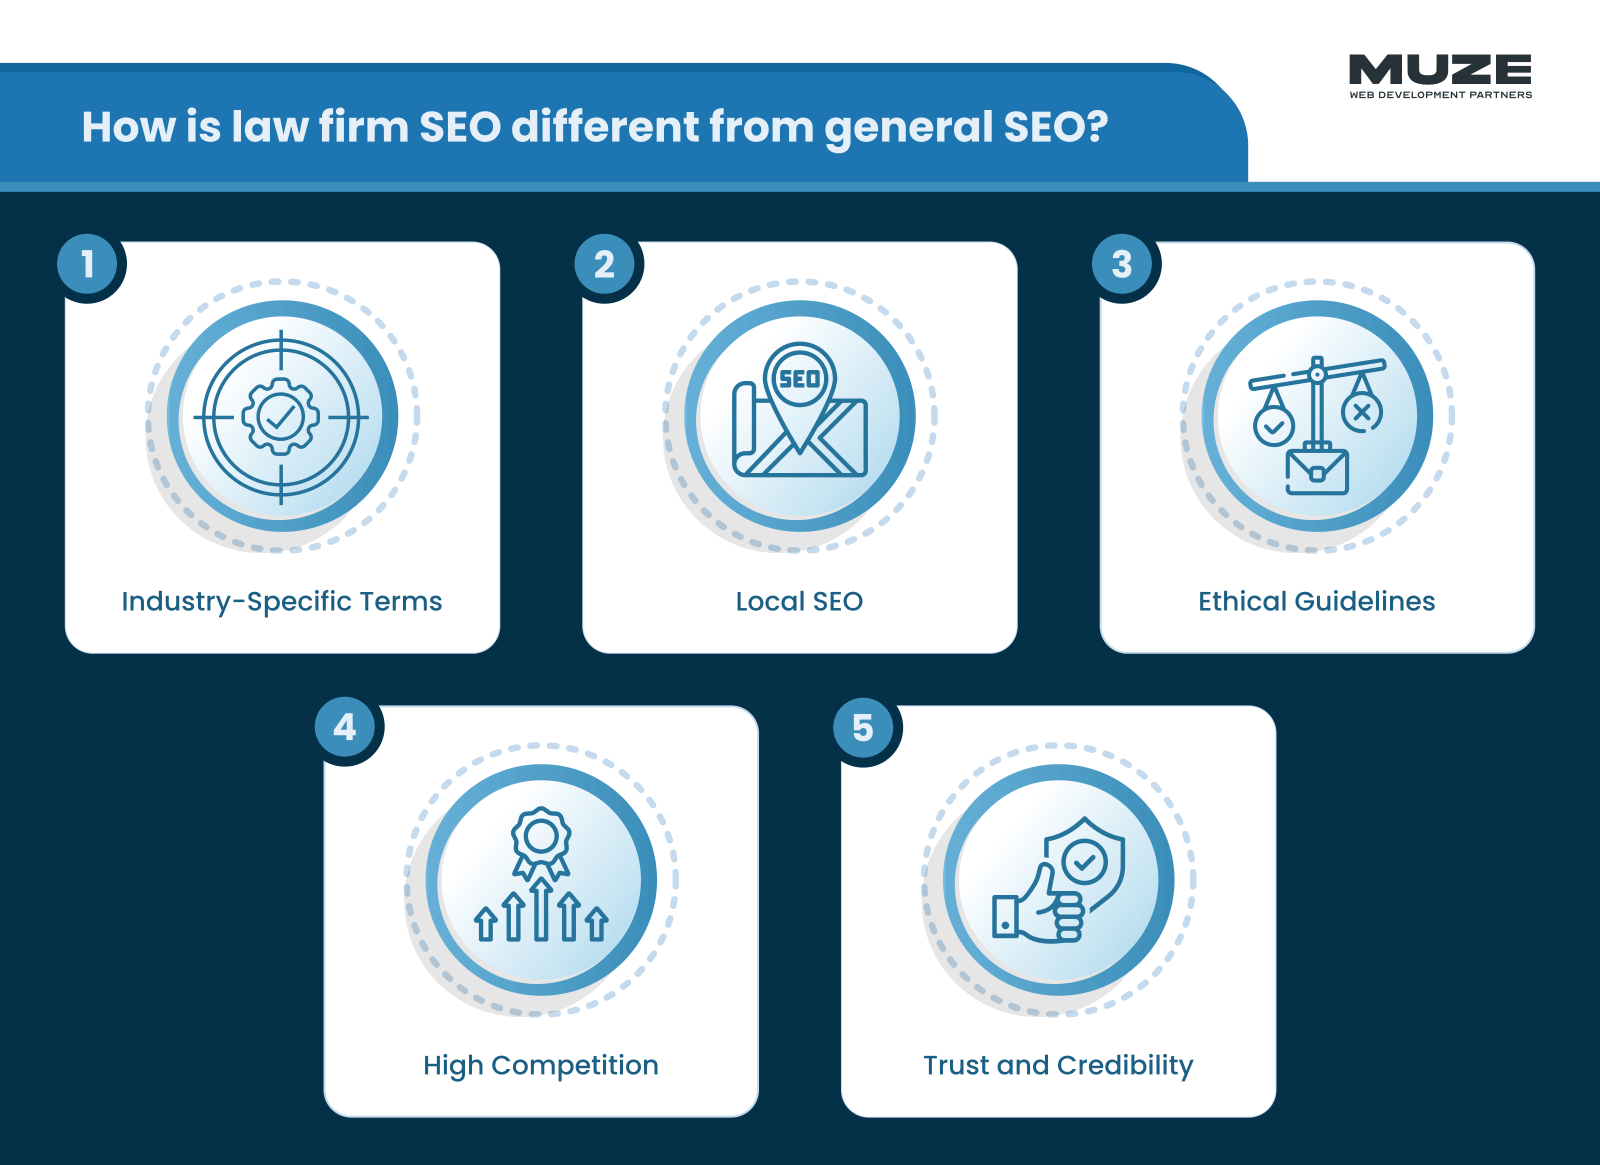 How is law firm SEO different from general SEO? - Law Firm SEO Services